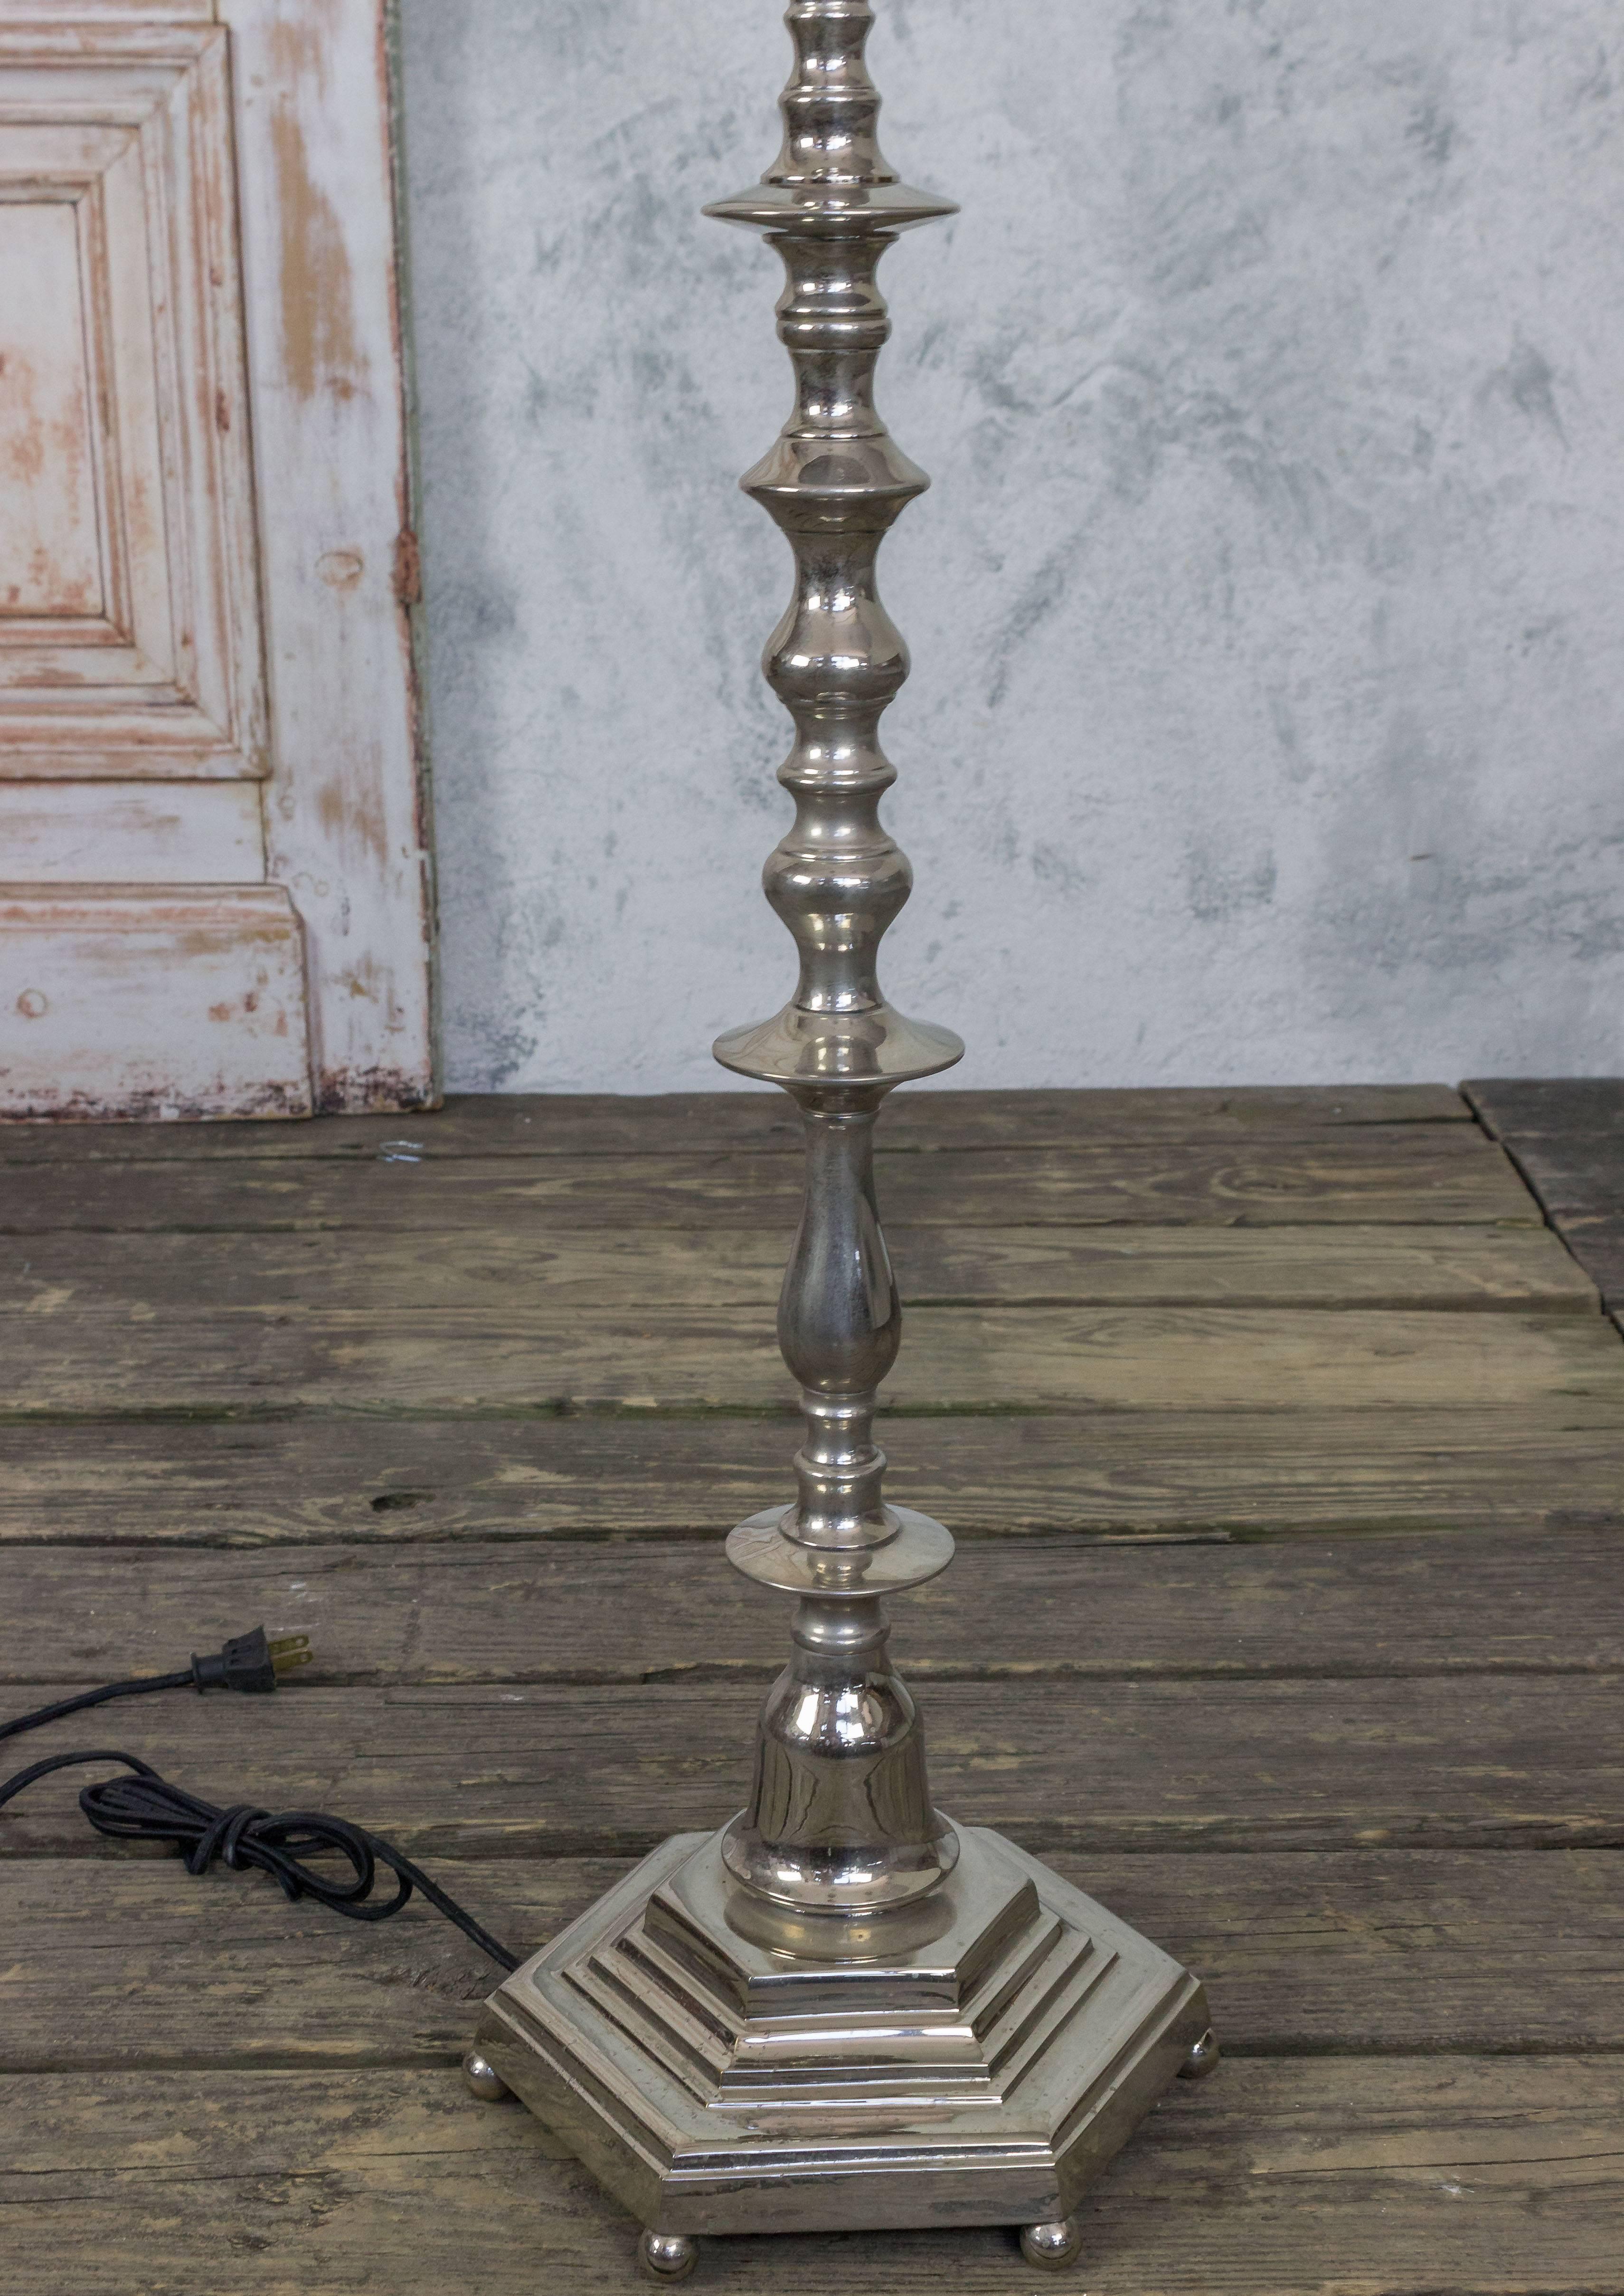 Mid-20th Century French Nickel-Plated Floor Lamp with Hexagonal Base